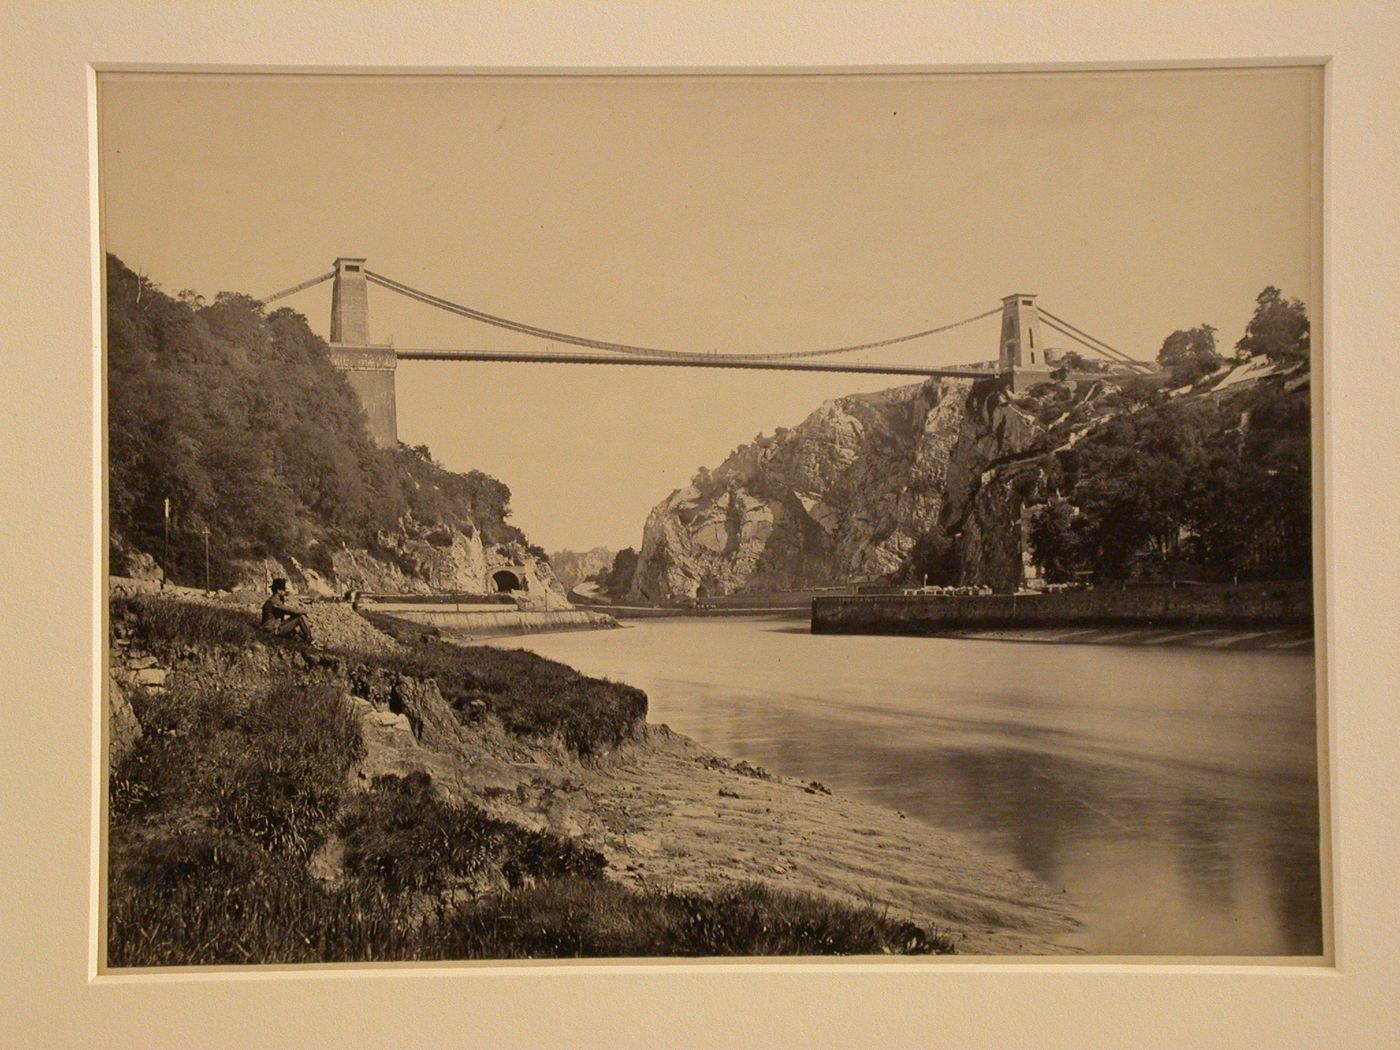 Clifton Suspension Bridge from the River Bank